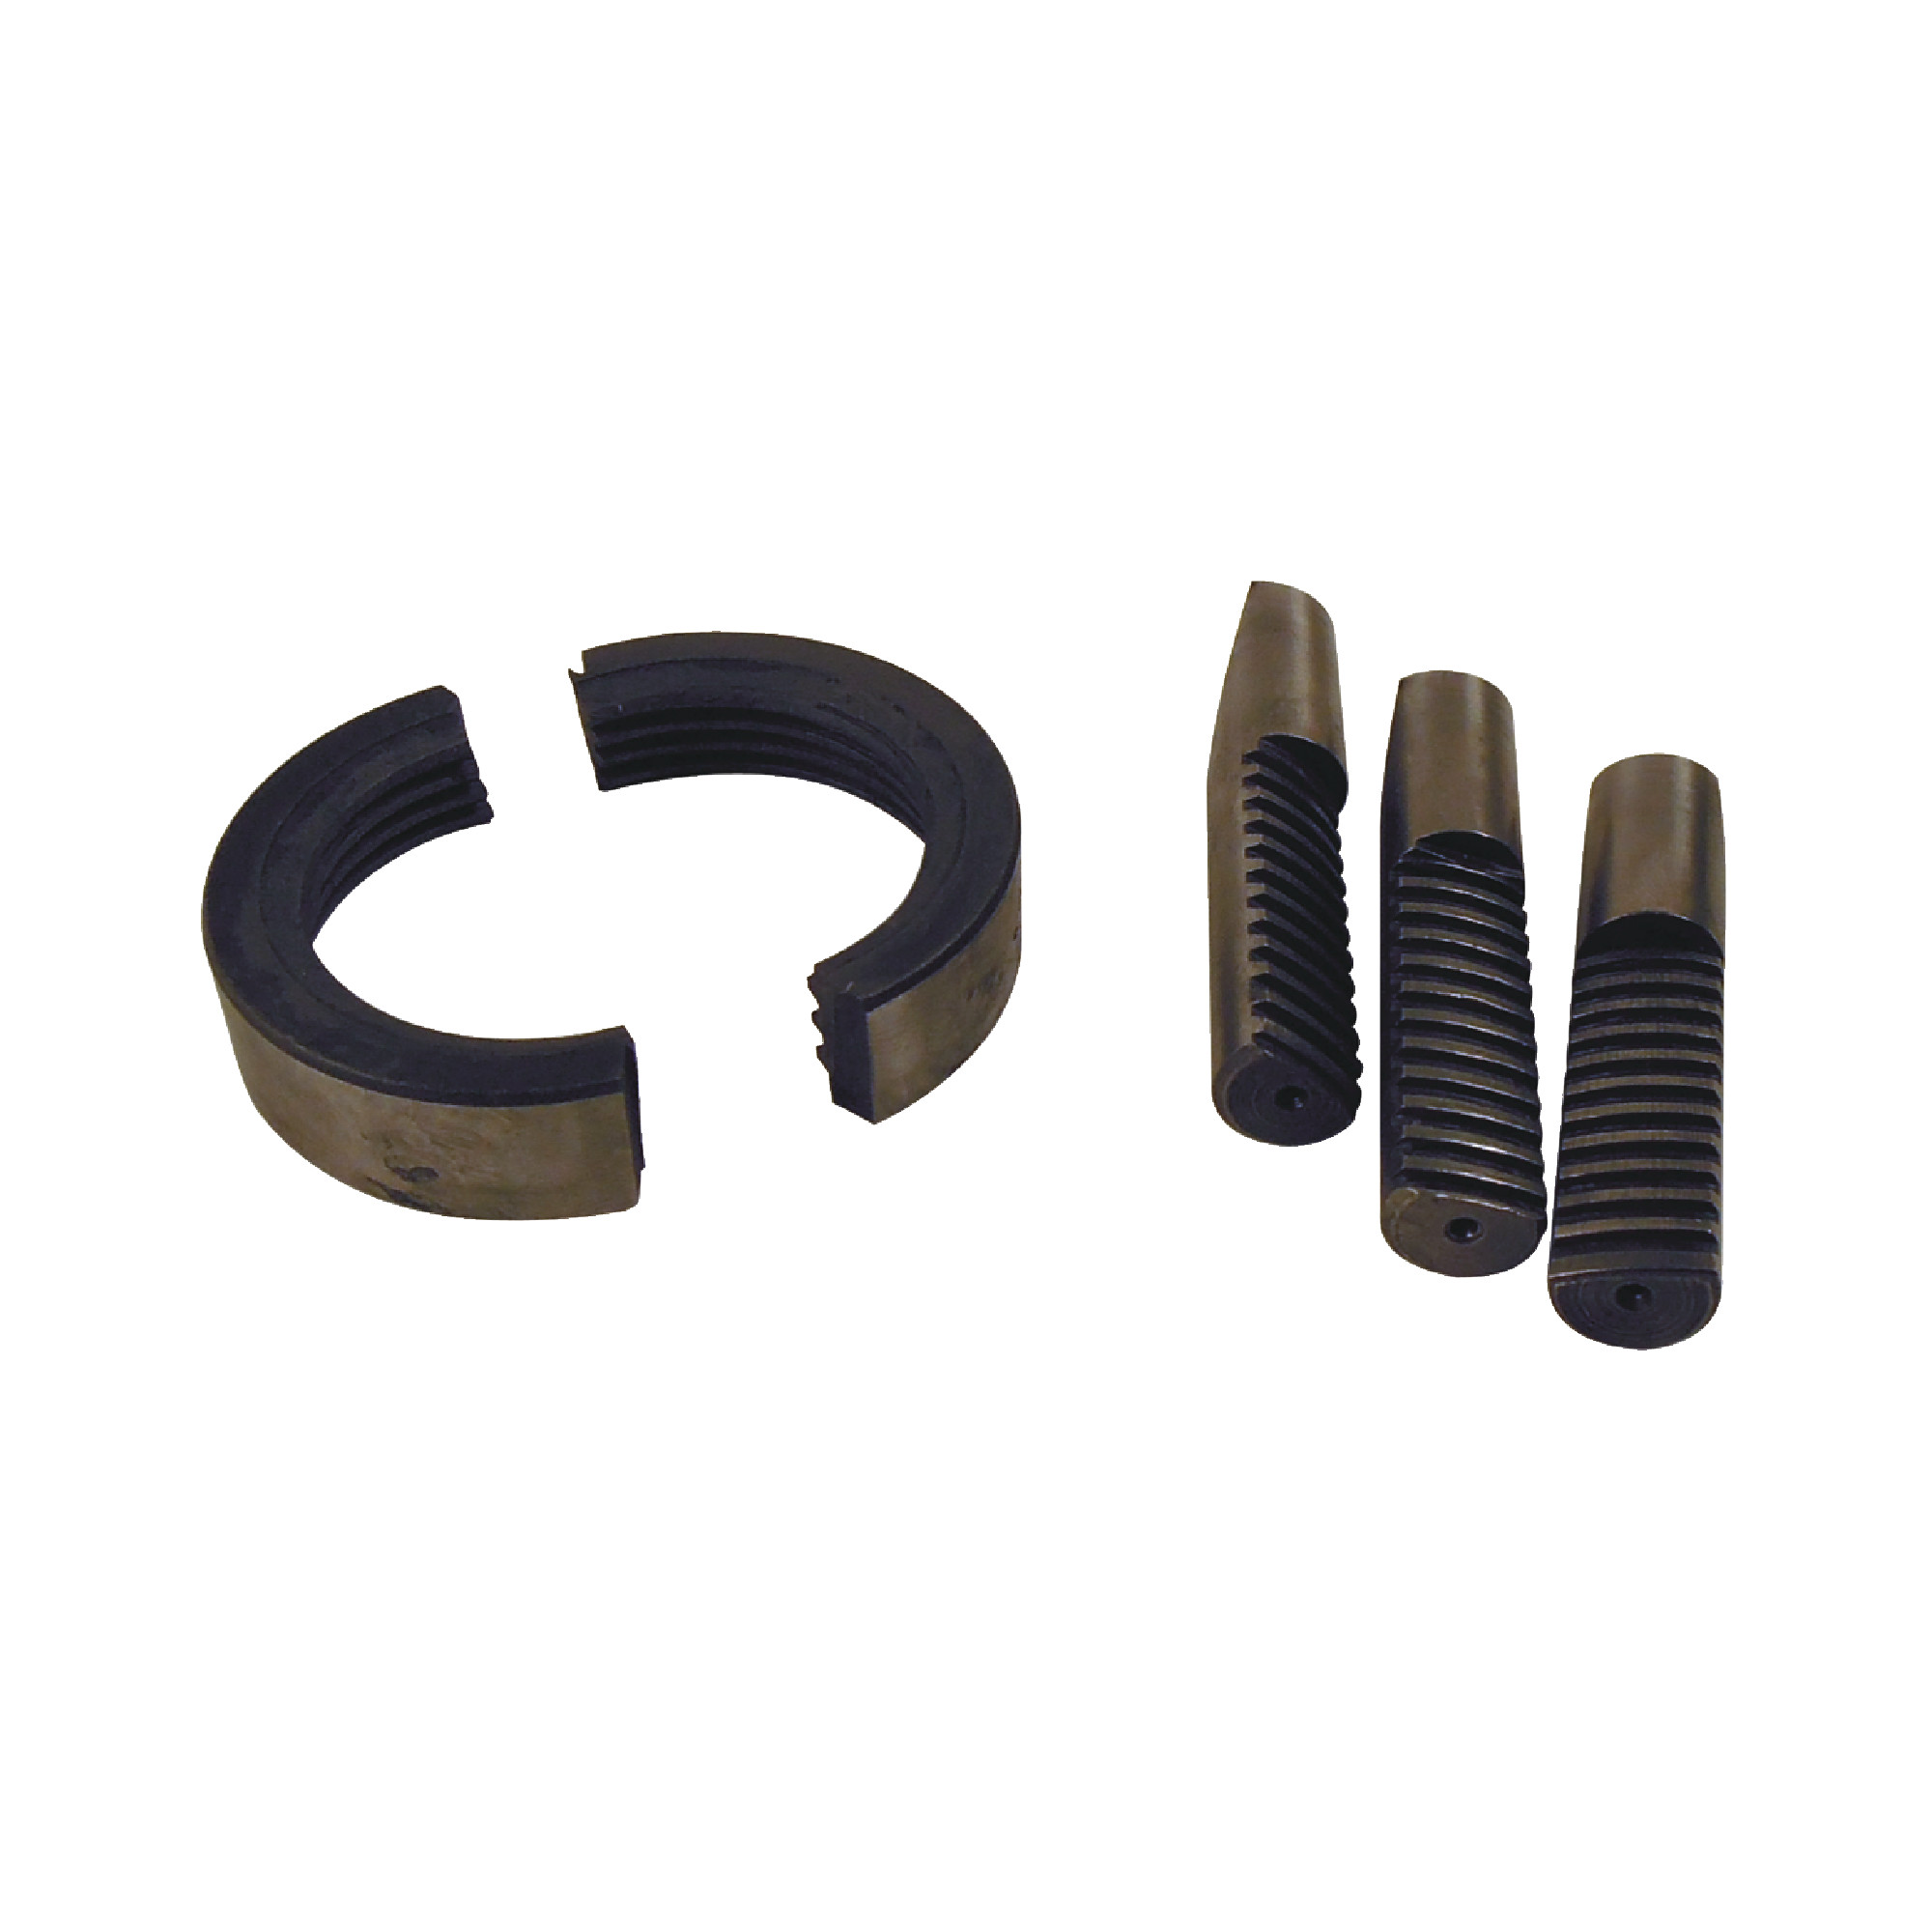 Replacement Jaw and Nut unit For Plain Bearing Geared Key Chuck